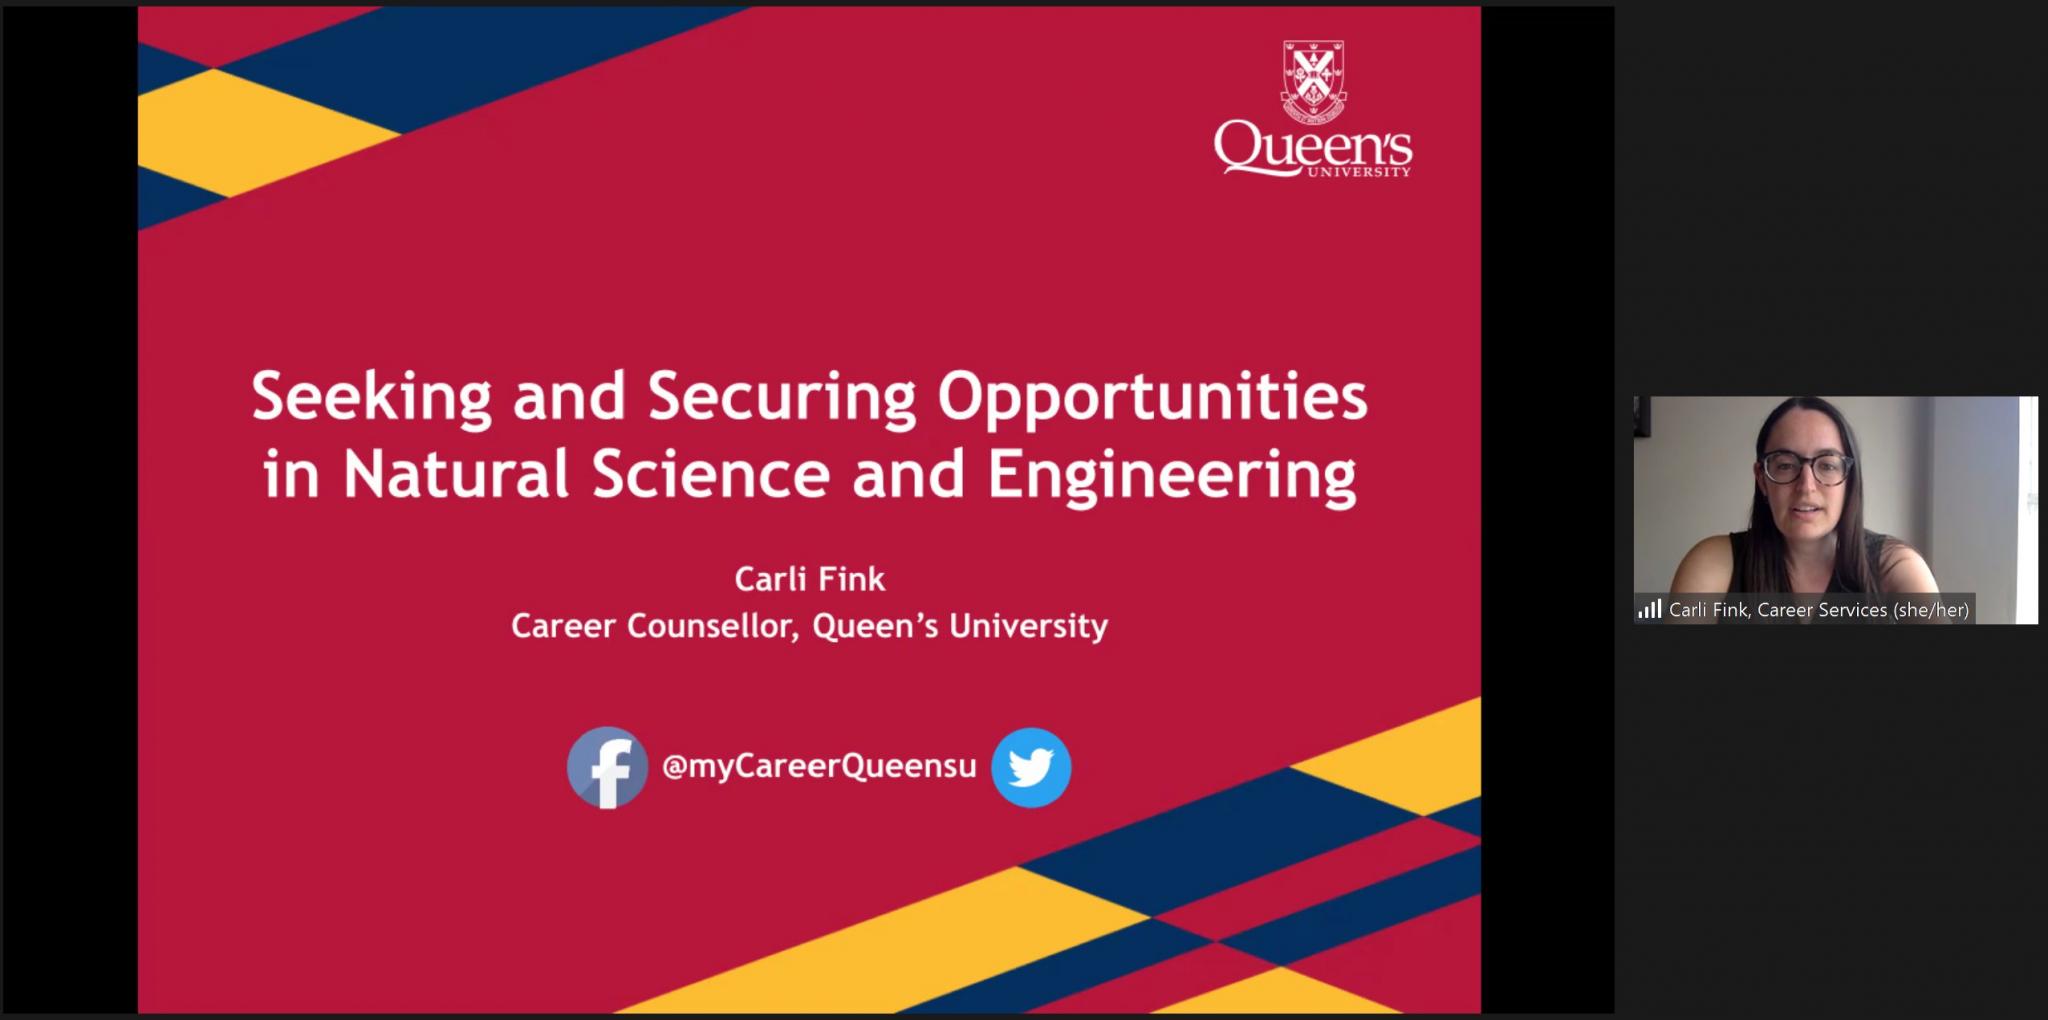 Workshop on "Seeking and Securing Opportunities" from Carli Fink, Career Counsellor, Career Services, Queen’s University